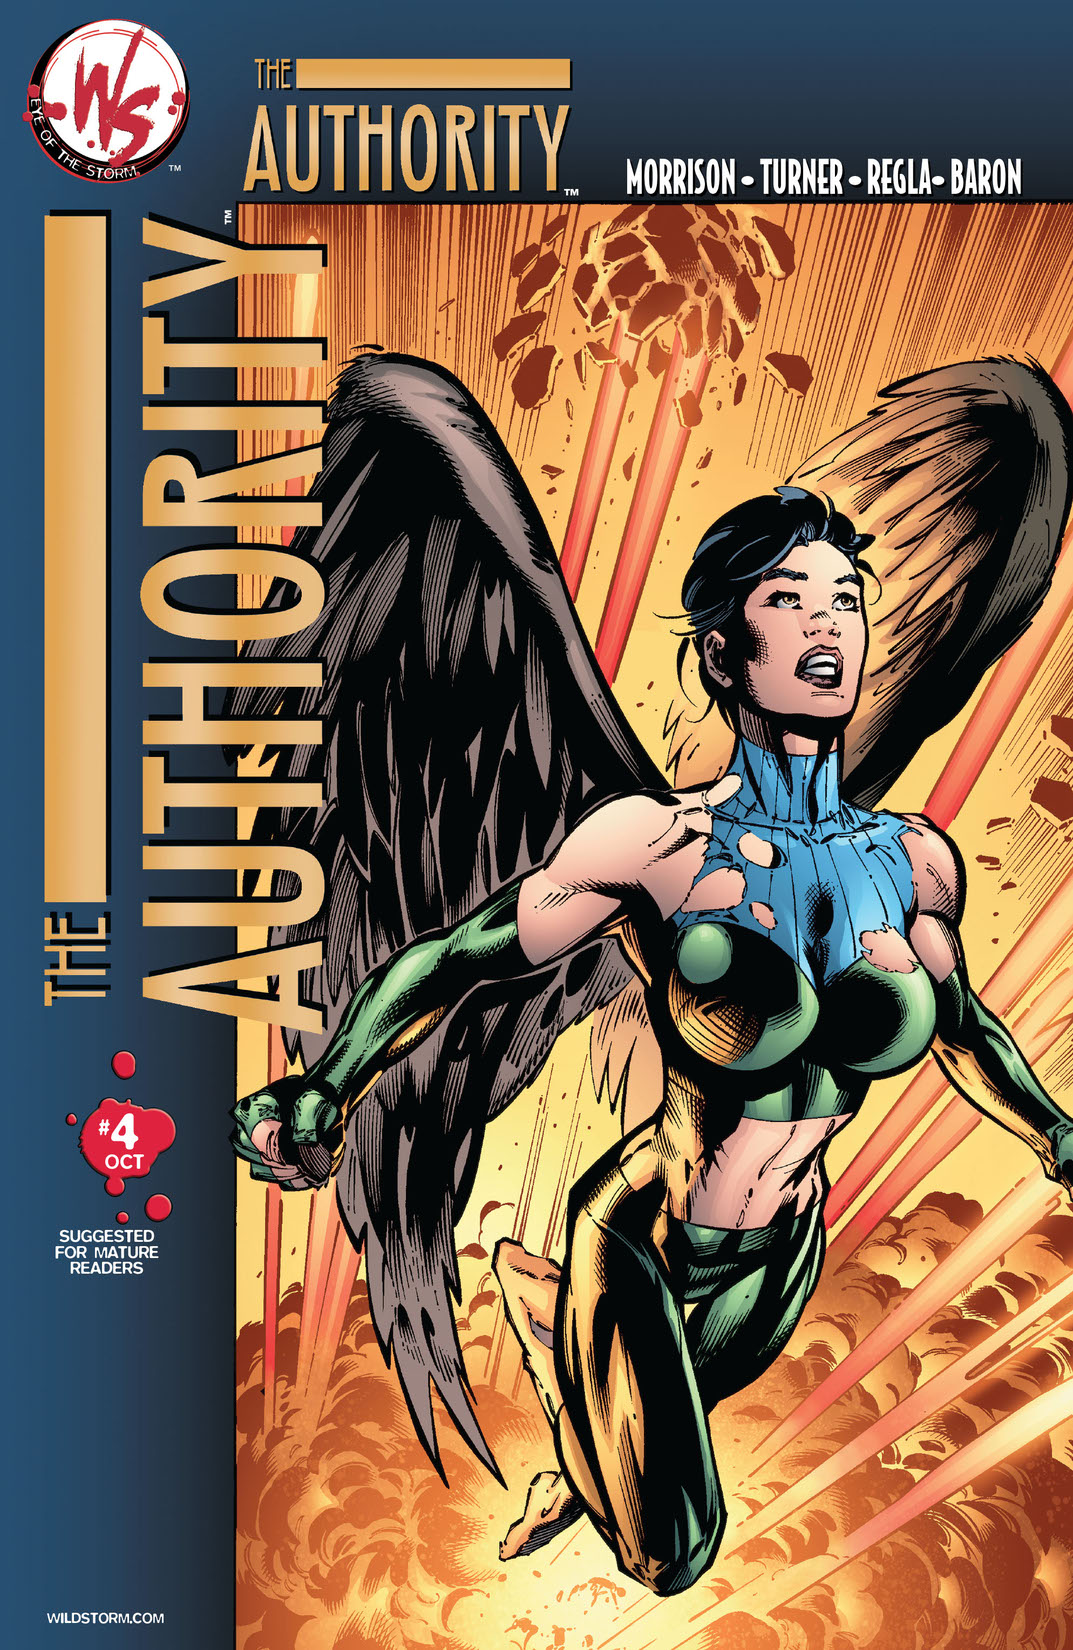 The Authority (2003-2004) #4 preview images